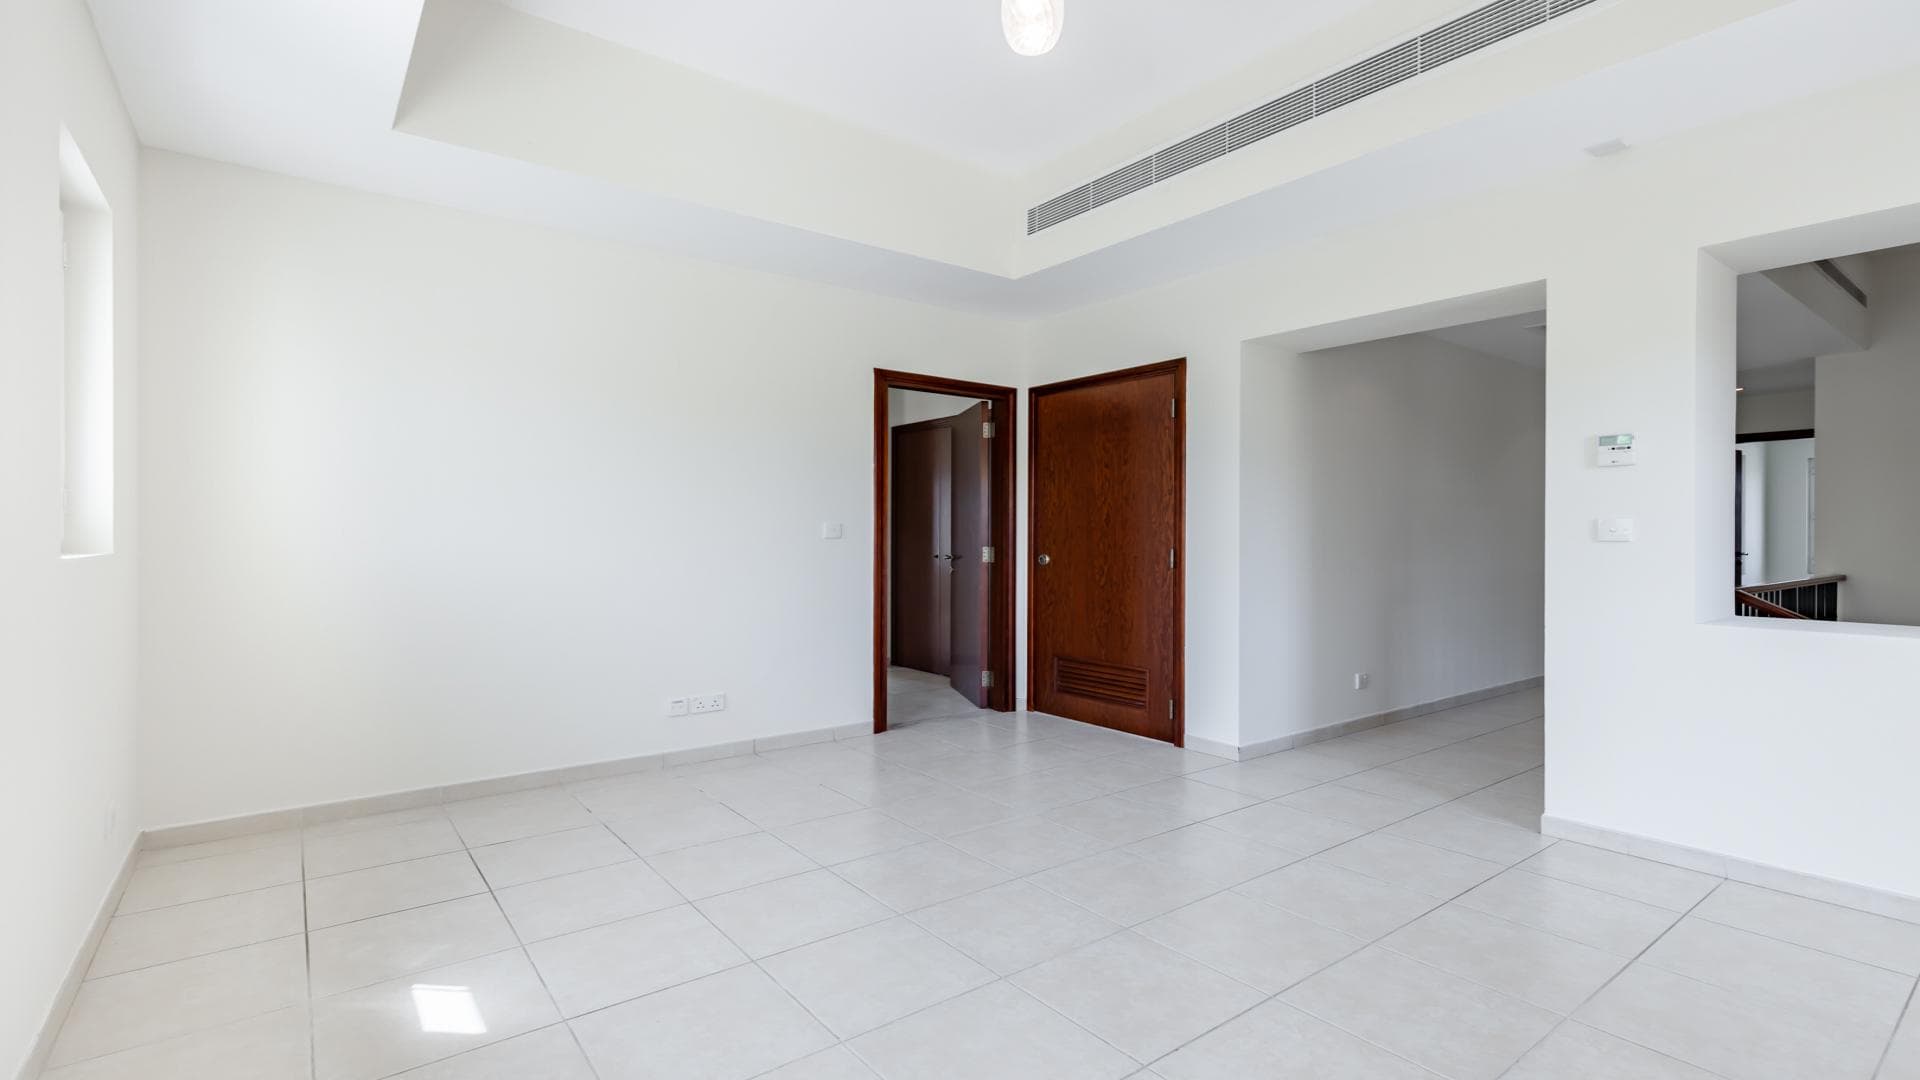 4 Bedroom Villa For Rent Cassia At The Fields Lp36555 25a5b5ac31dce800.jpg